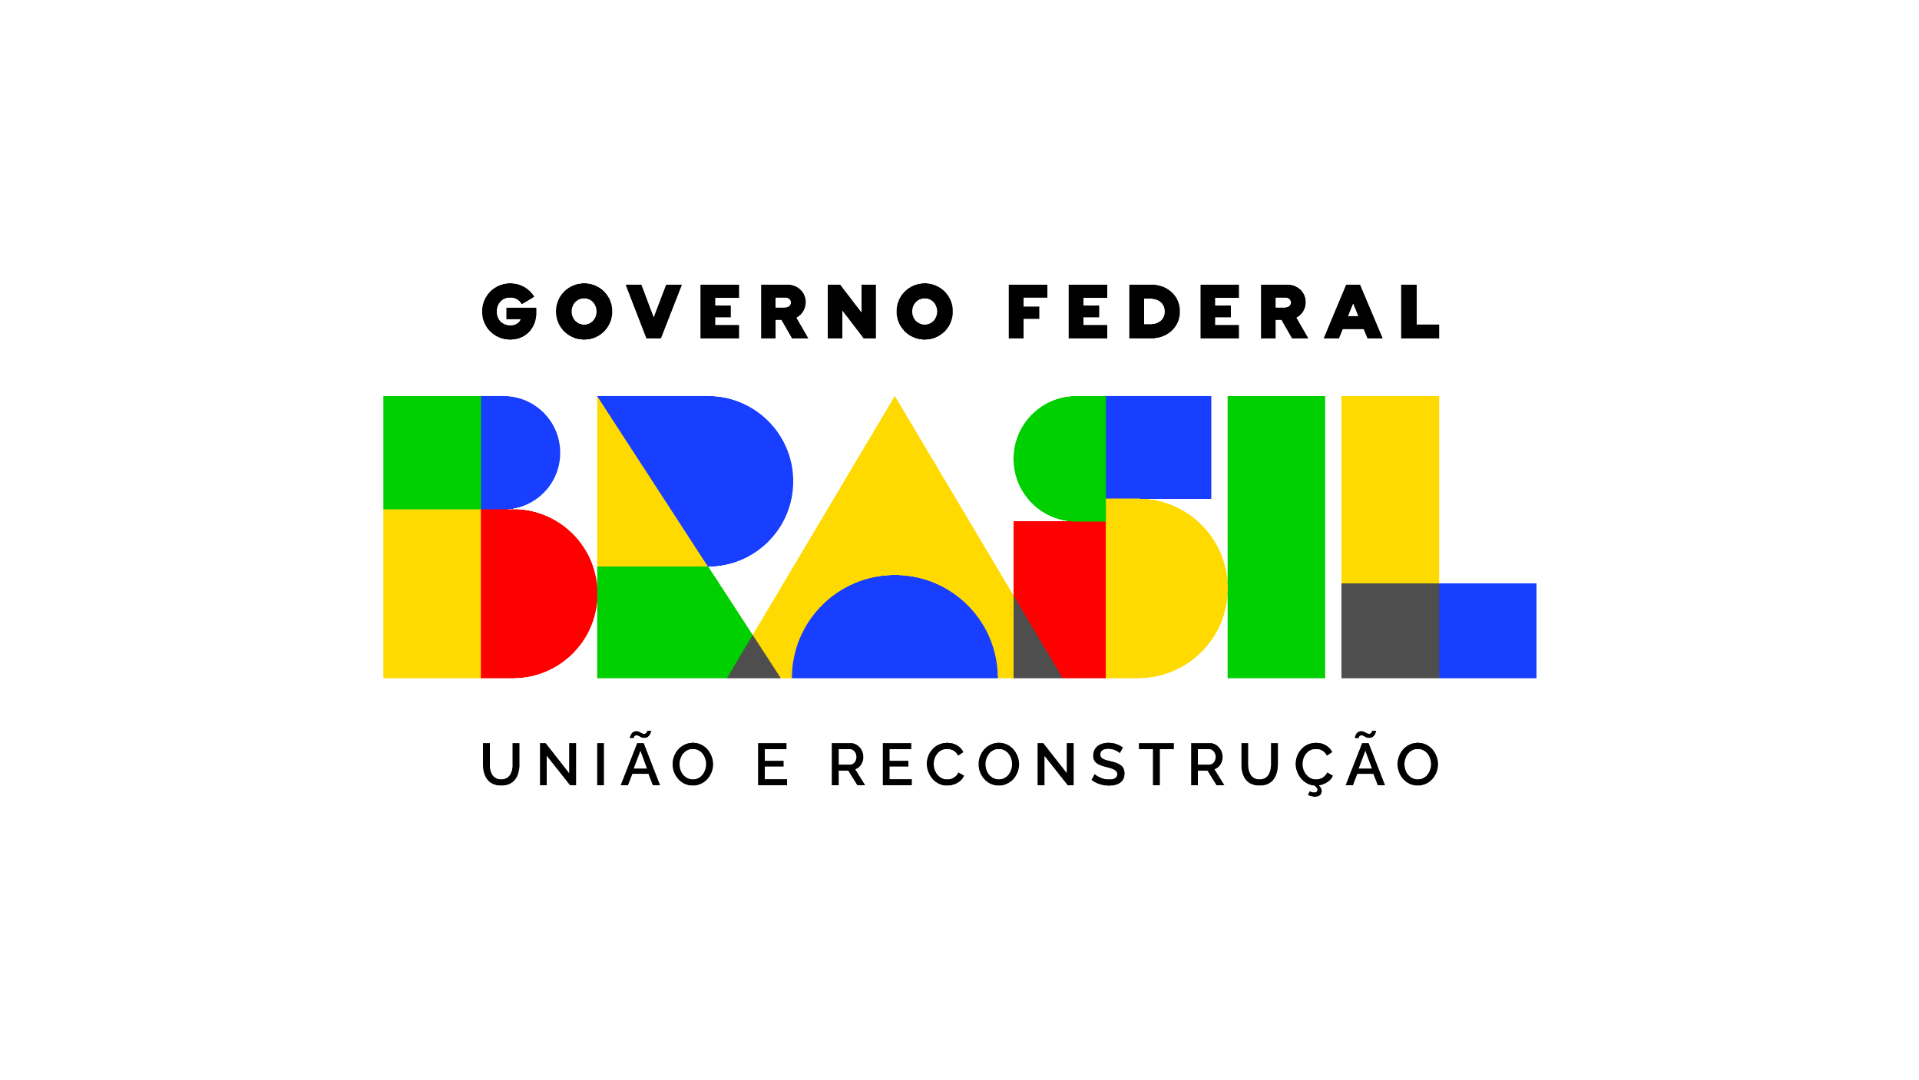 2023_BR_GovFederal_MarcaOficial_RGB.png